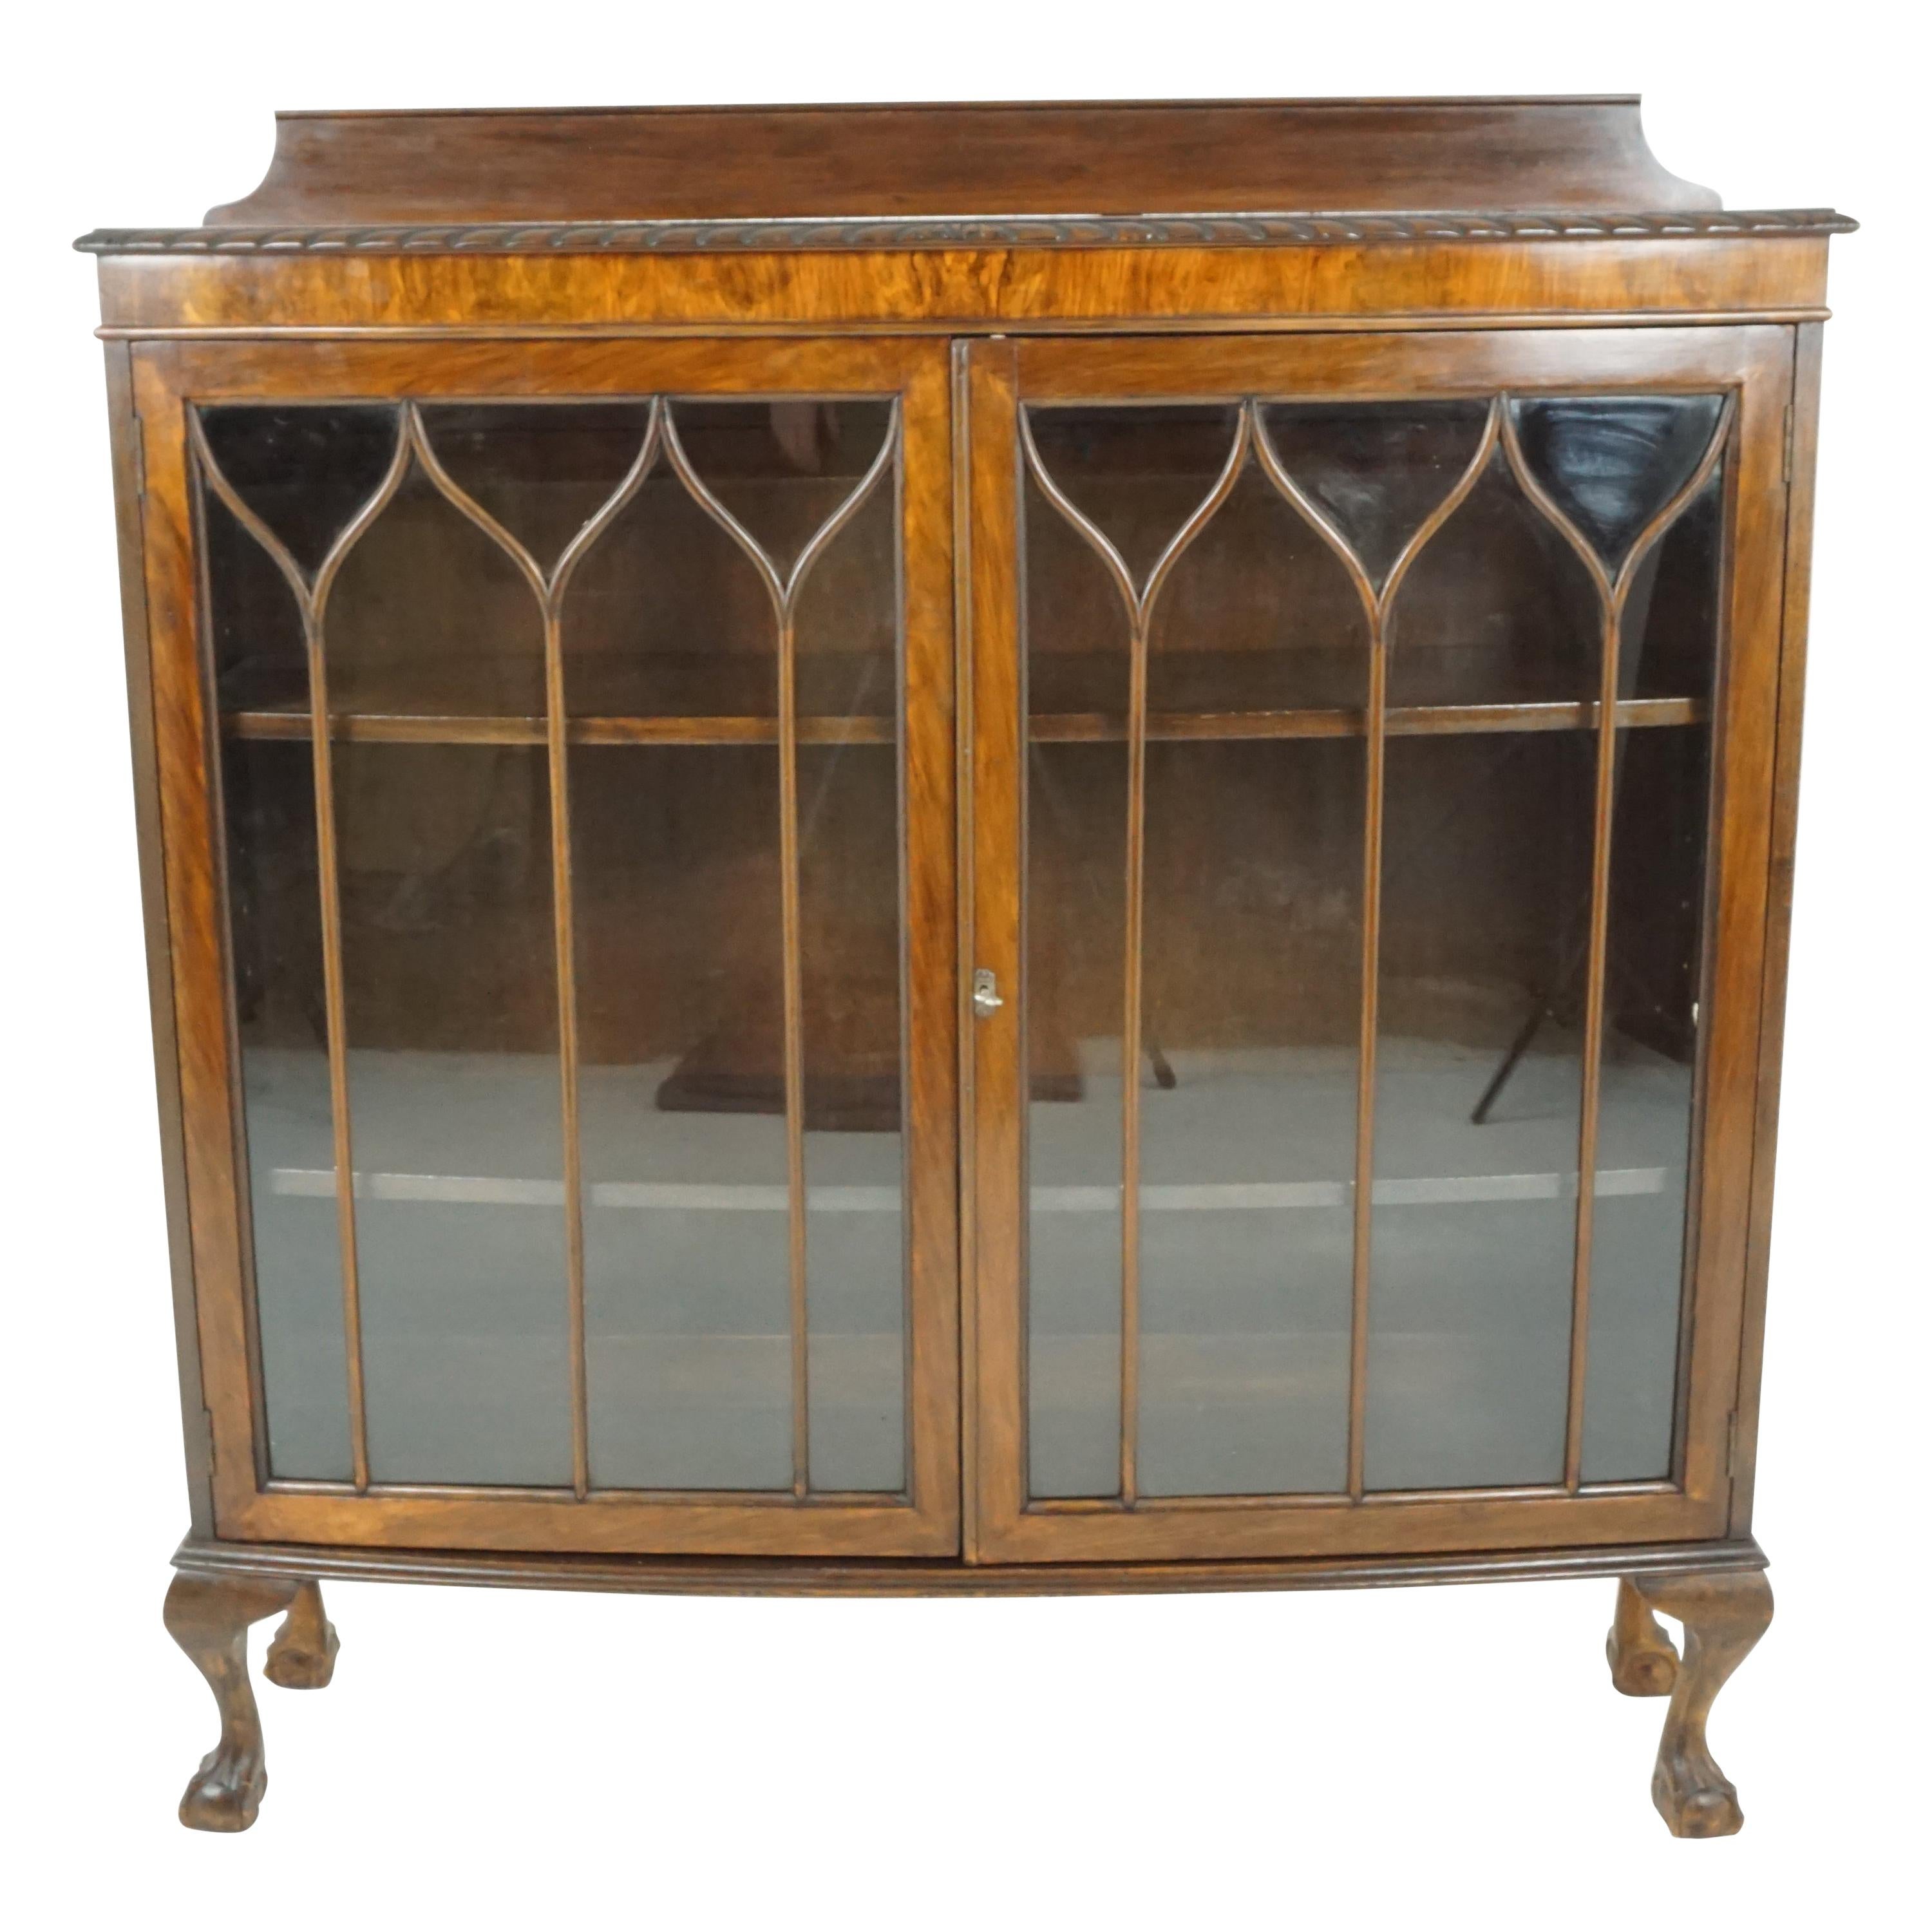 Antique Walnut Bookcase, Bow Front Display Cabinet, Scotland 1920, B1927